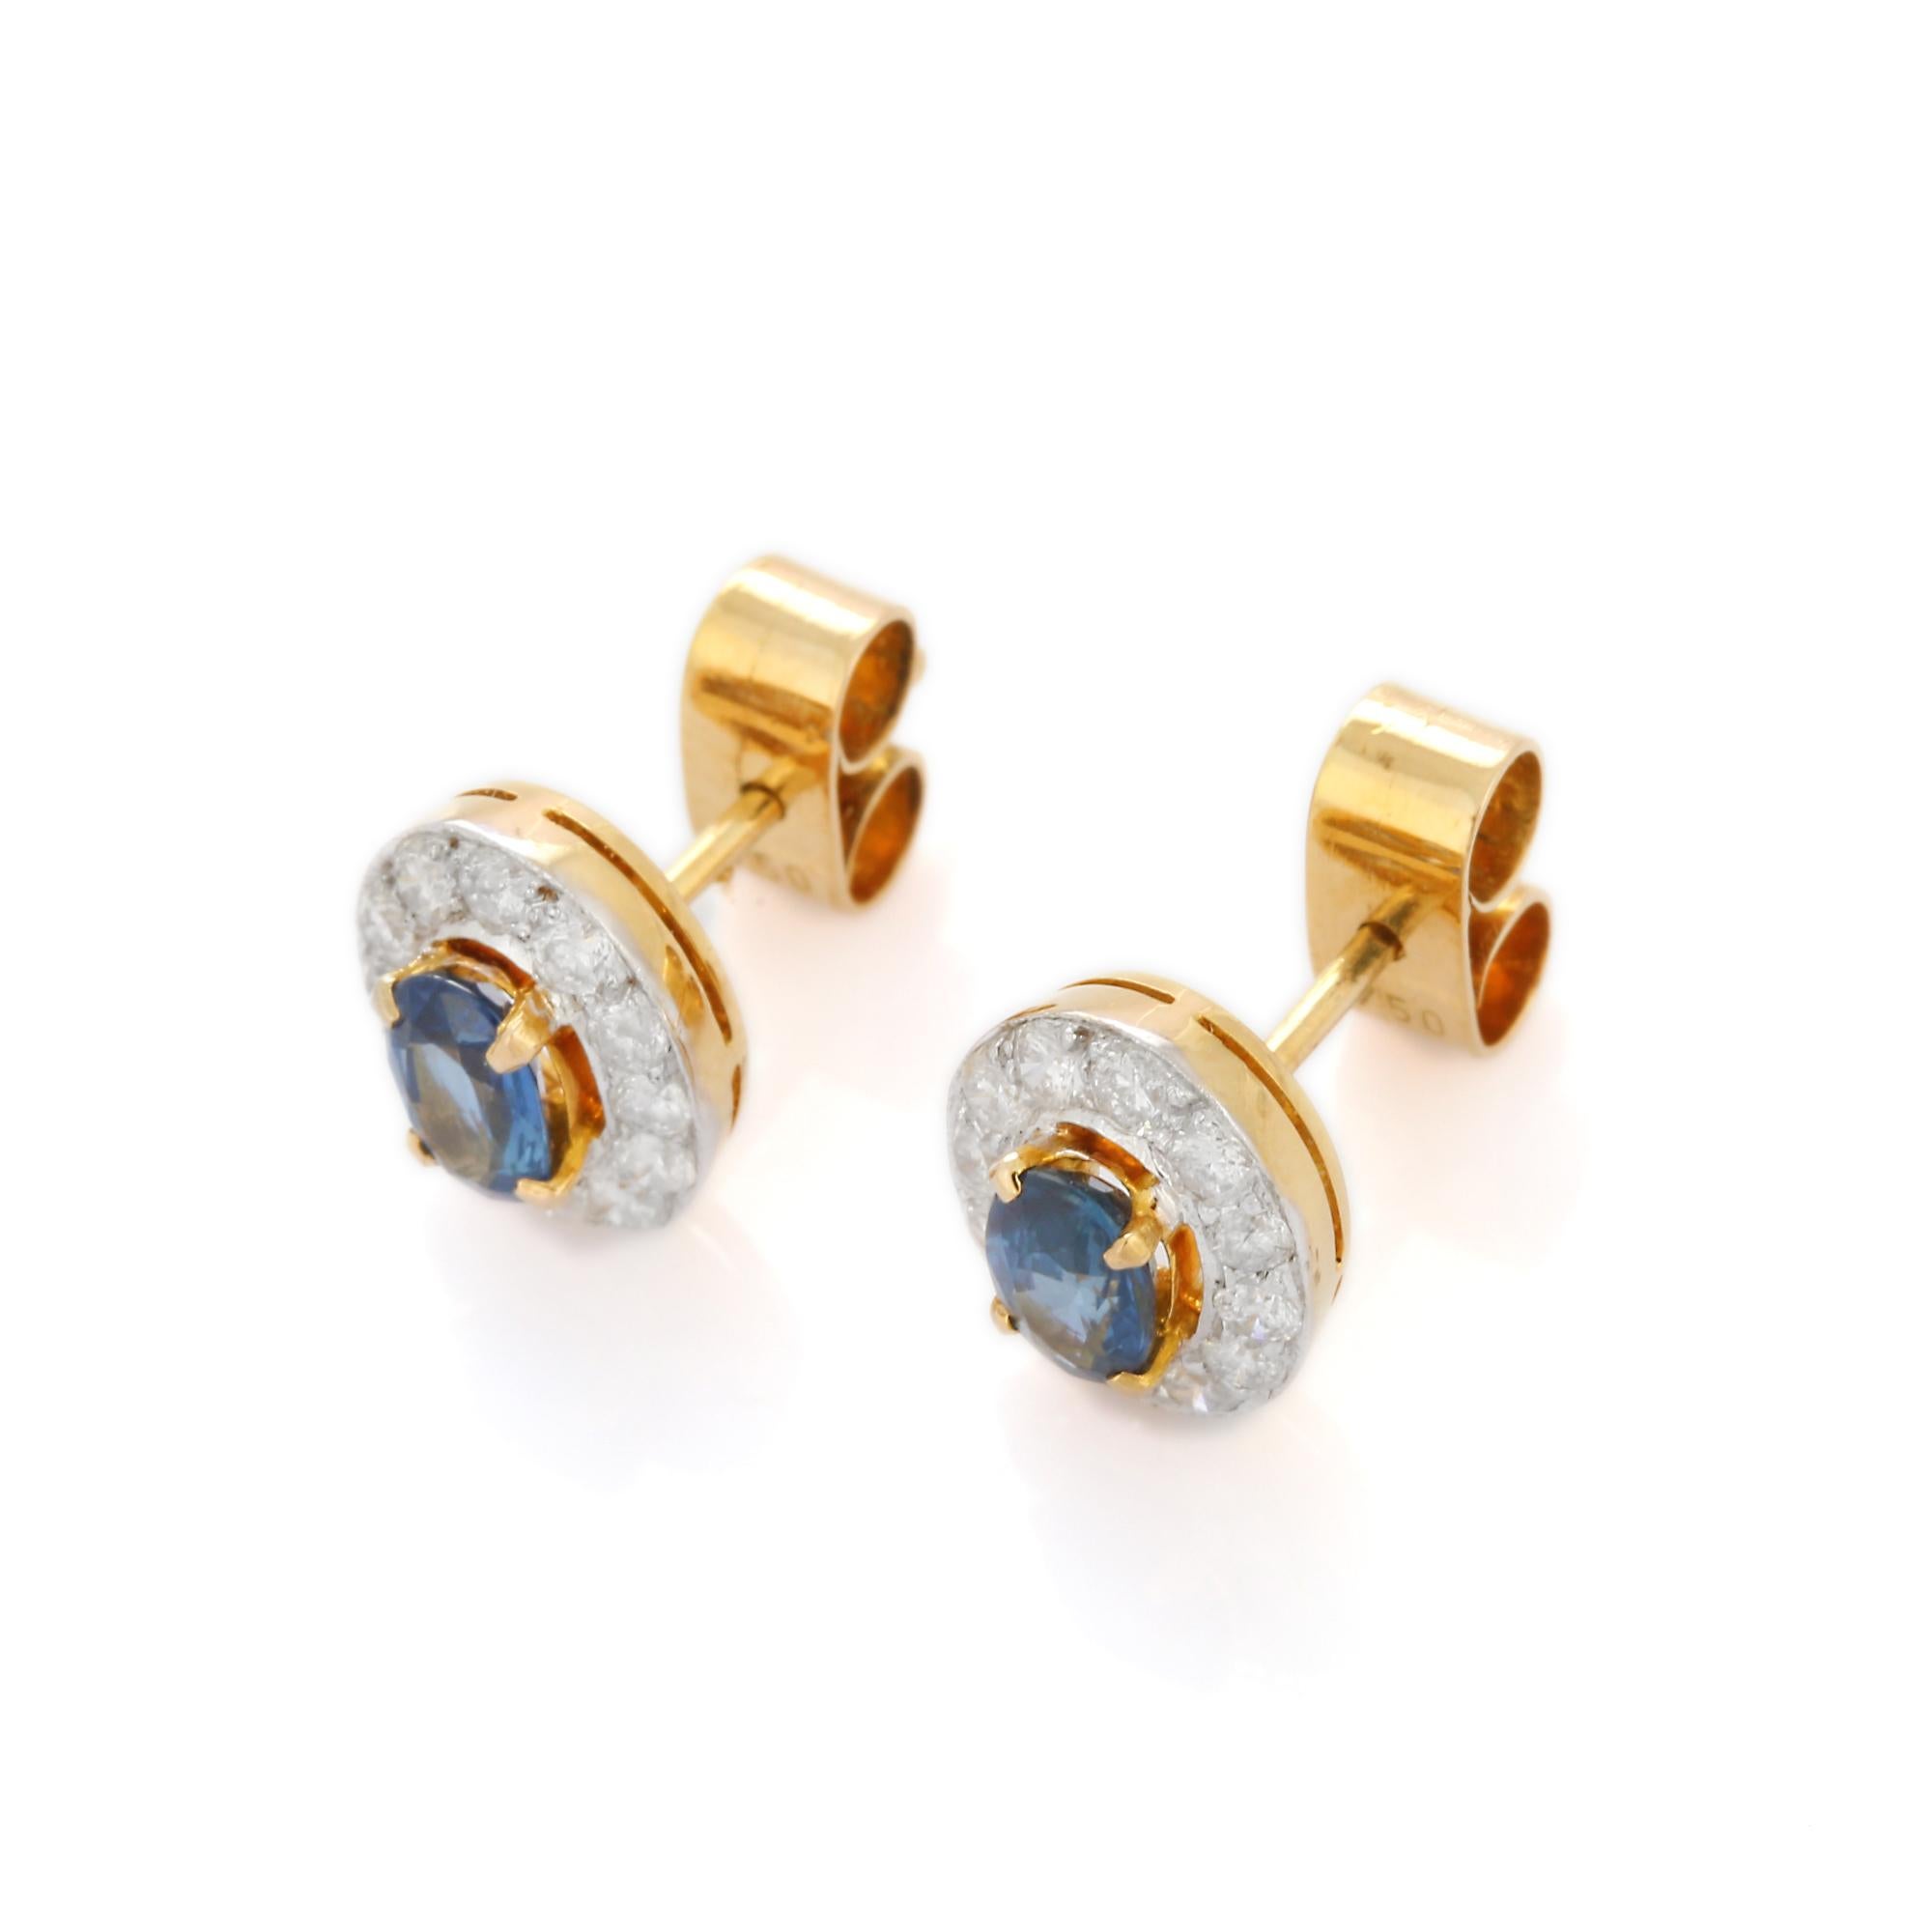 Studs create a subtle beauty while showcasing the colors of the natural precious gemstones and illuminating diamonds making a statement.

Oval cut blue sapphire studs with diamonds in 18K gold. Embrace your look with these stunning pair of earrings